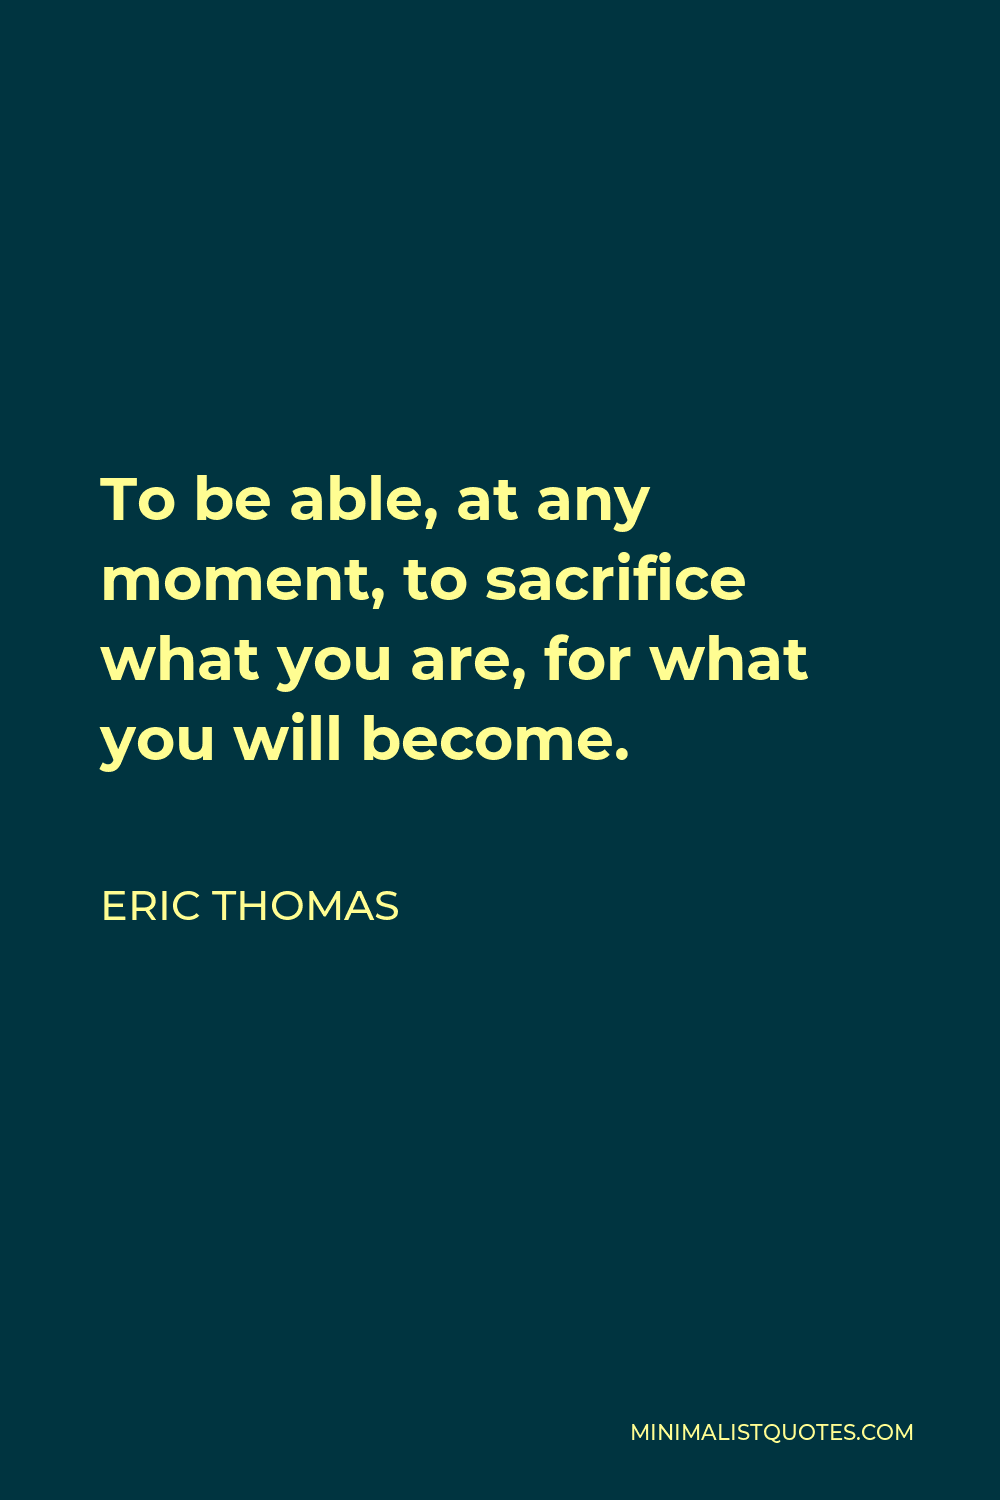 Eric Thomas Quote - To be able, at any moment, to sacrifice what you are, for what you will become.